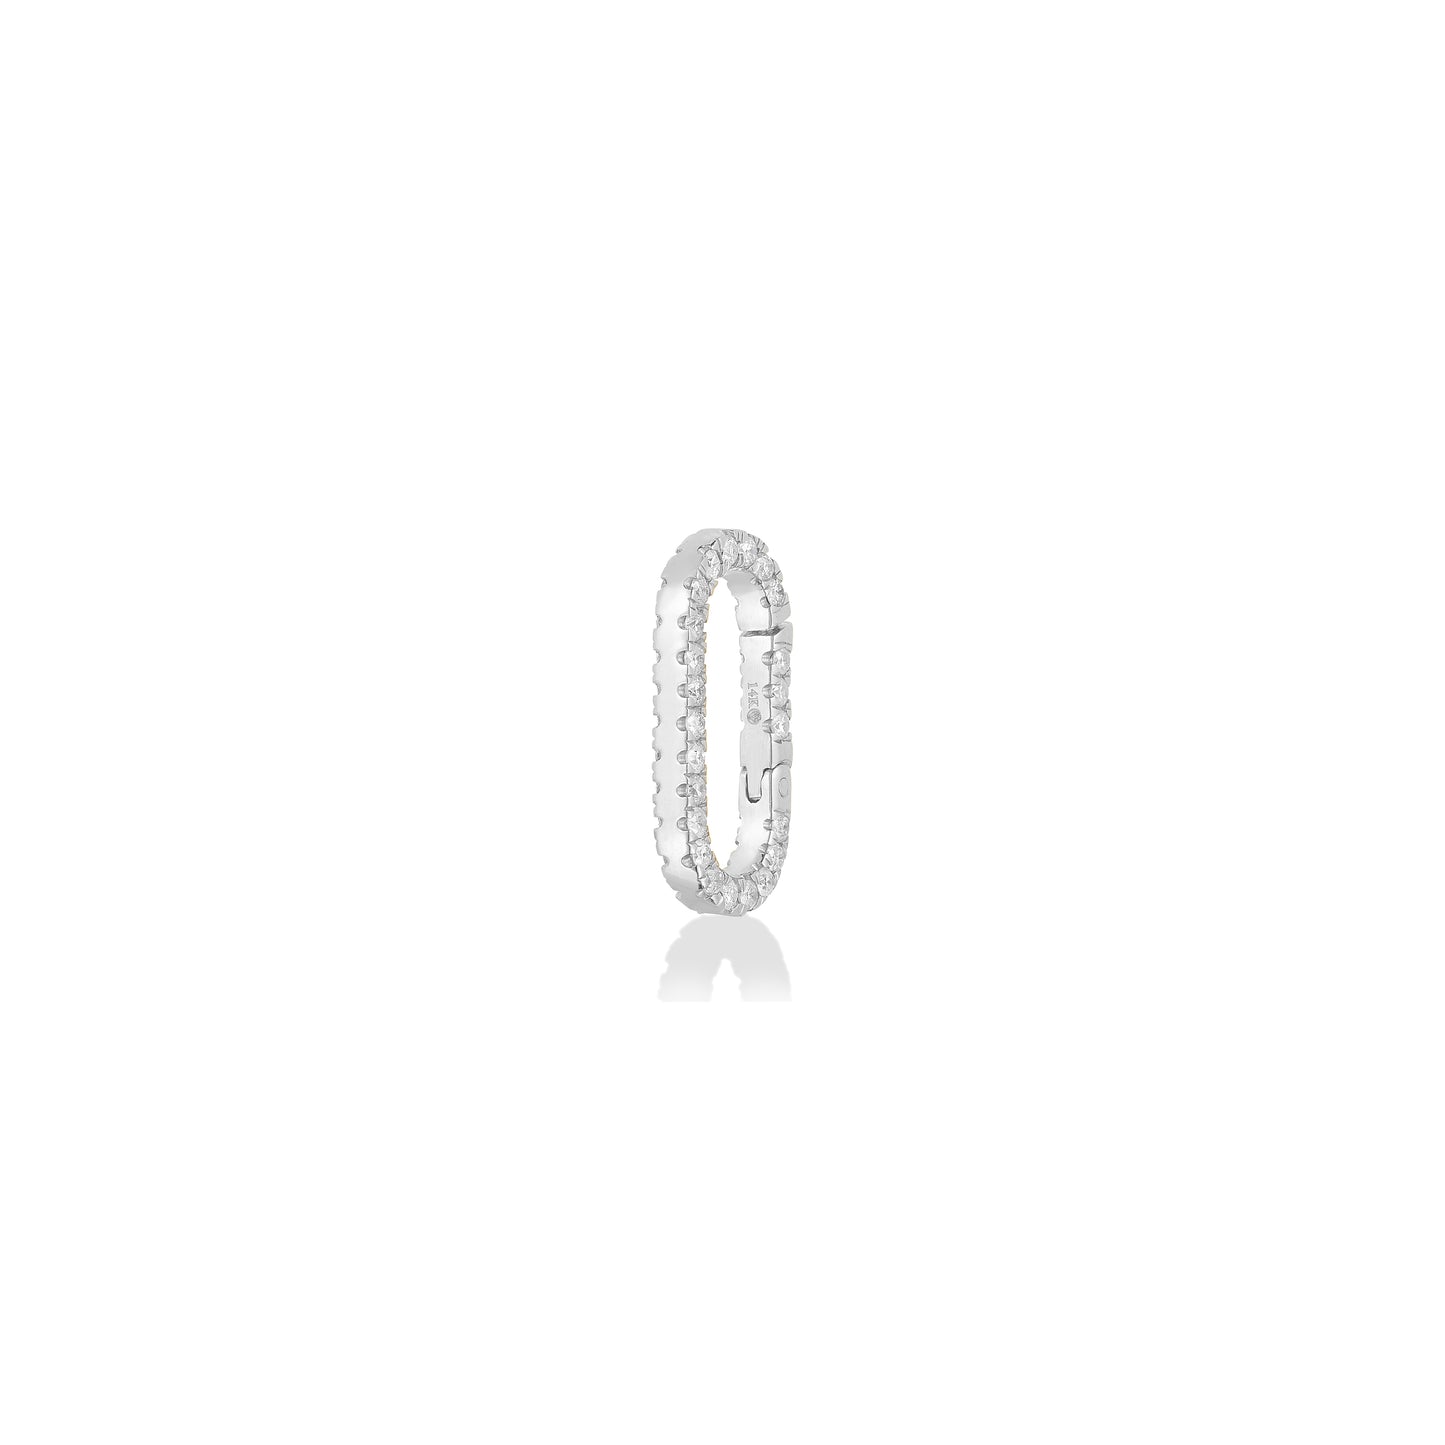 14k white gold oval locking charm with pave diamonds on facades.